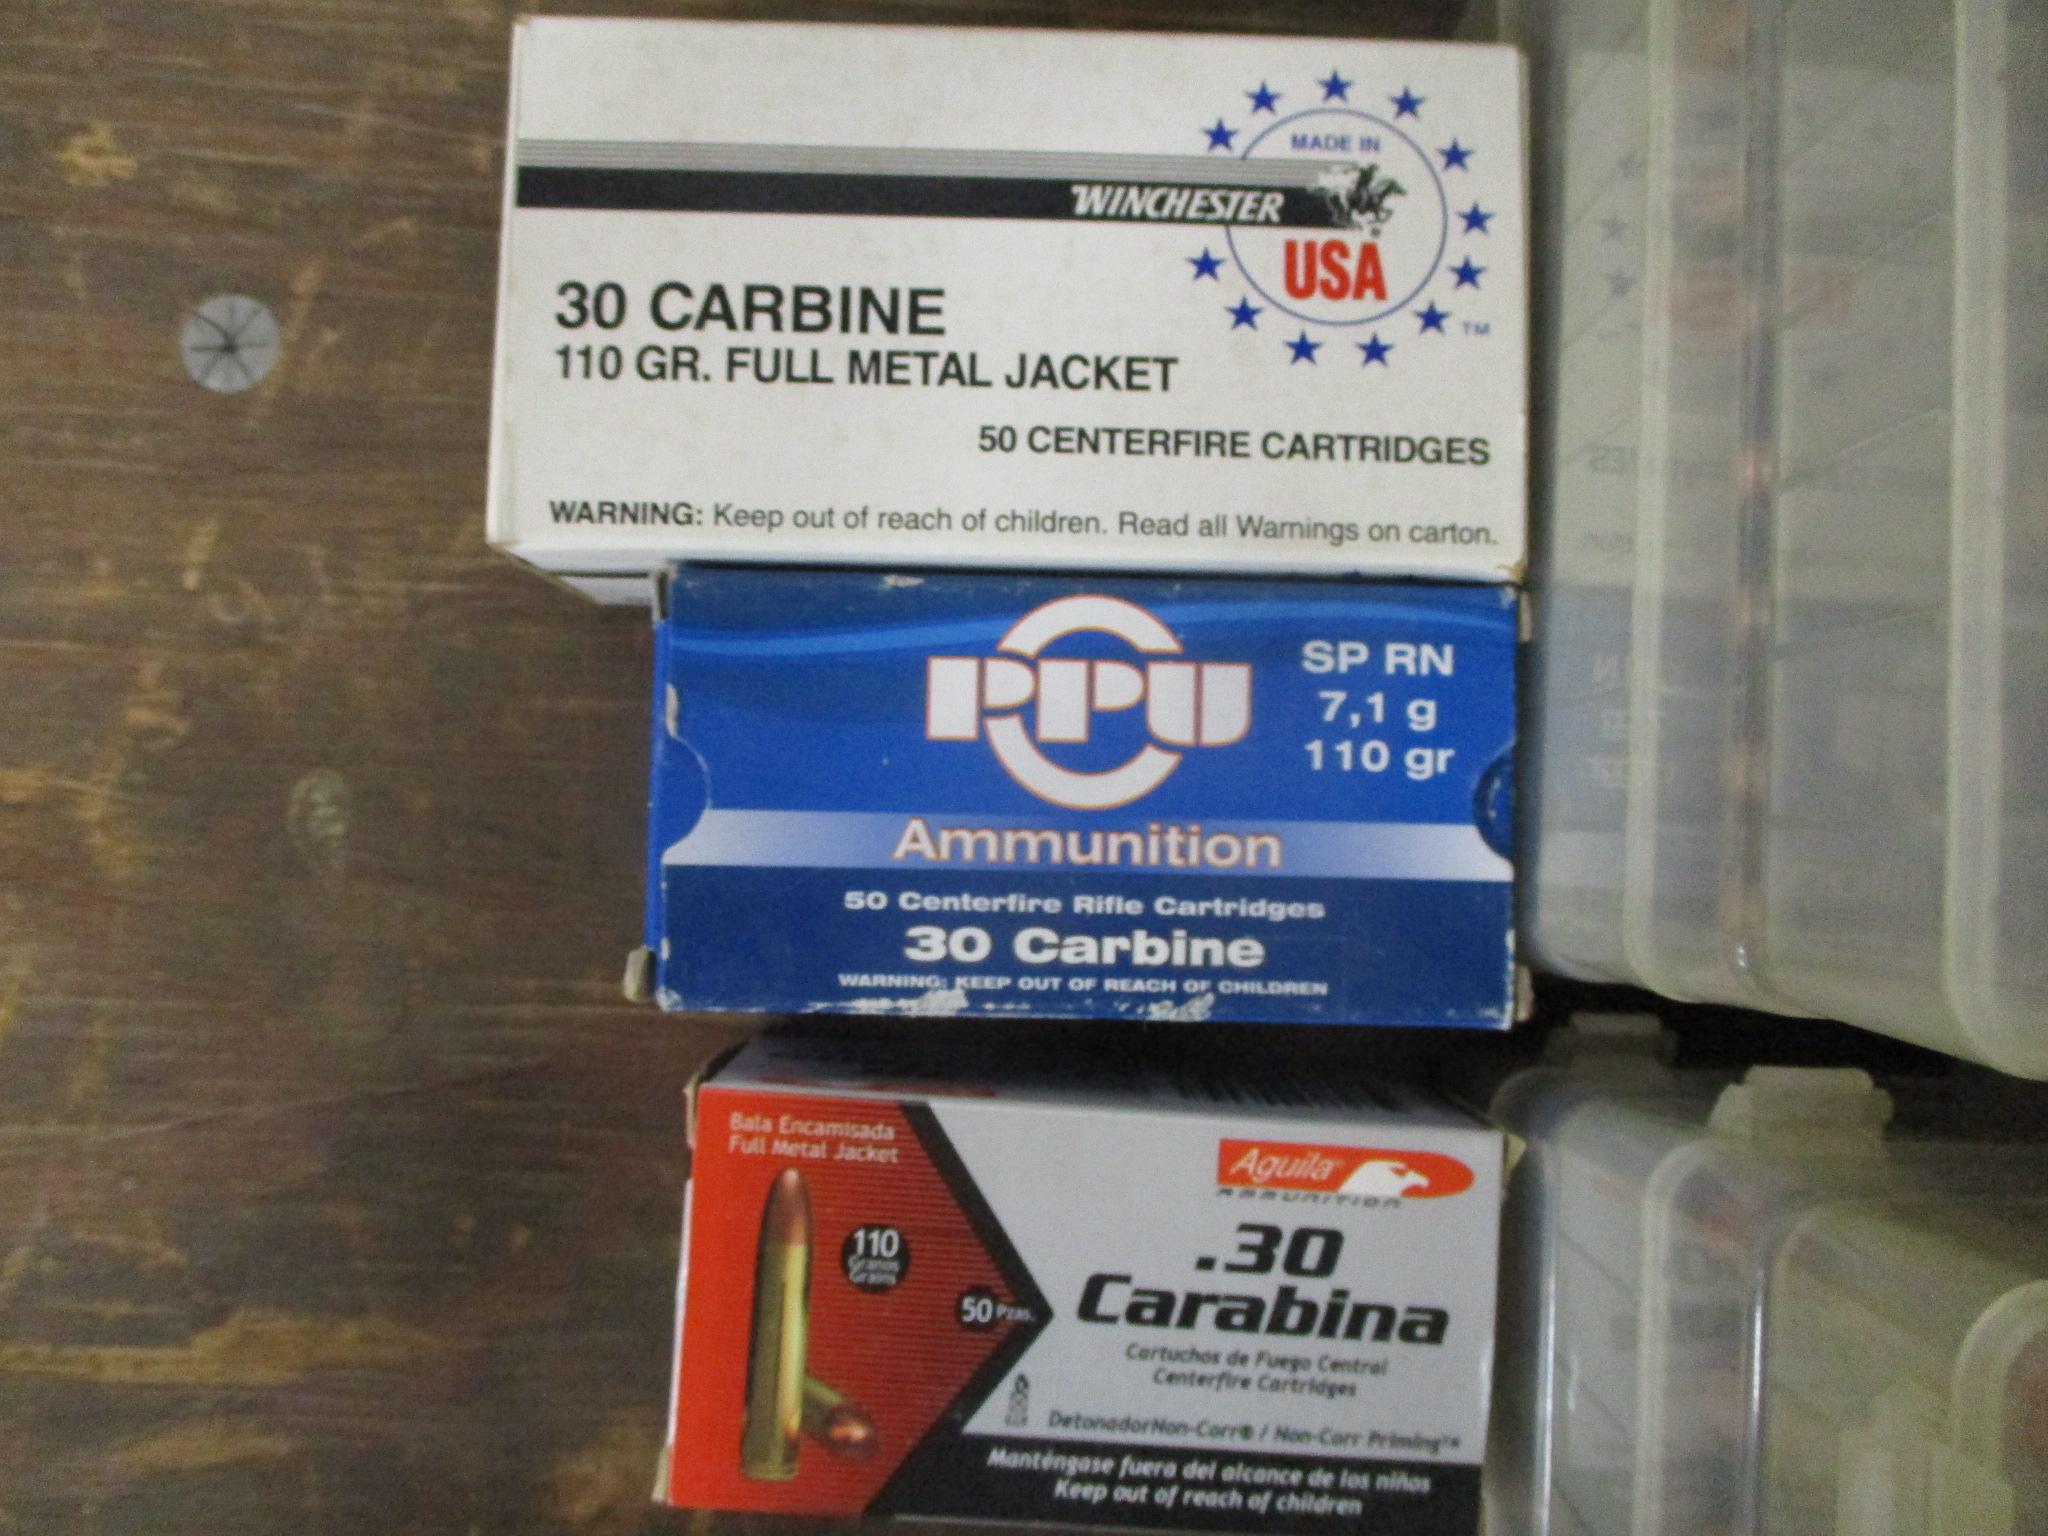 541 rds. repackaged 30 carbine plus